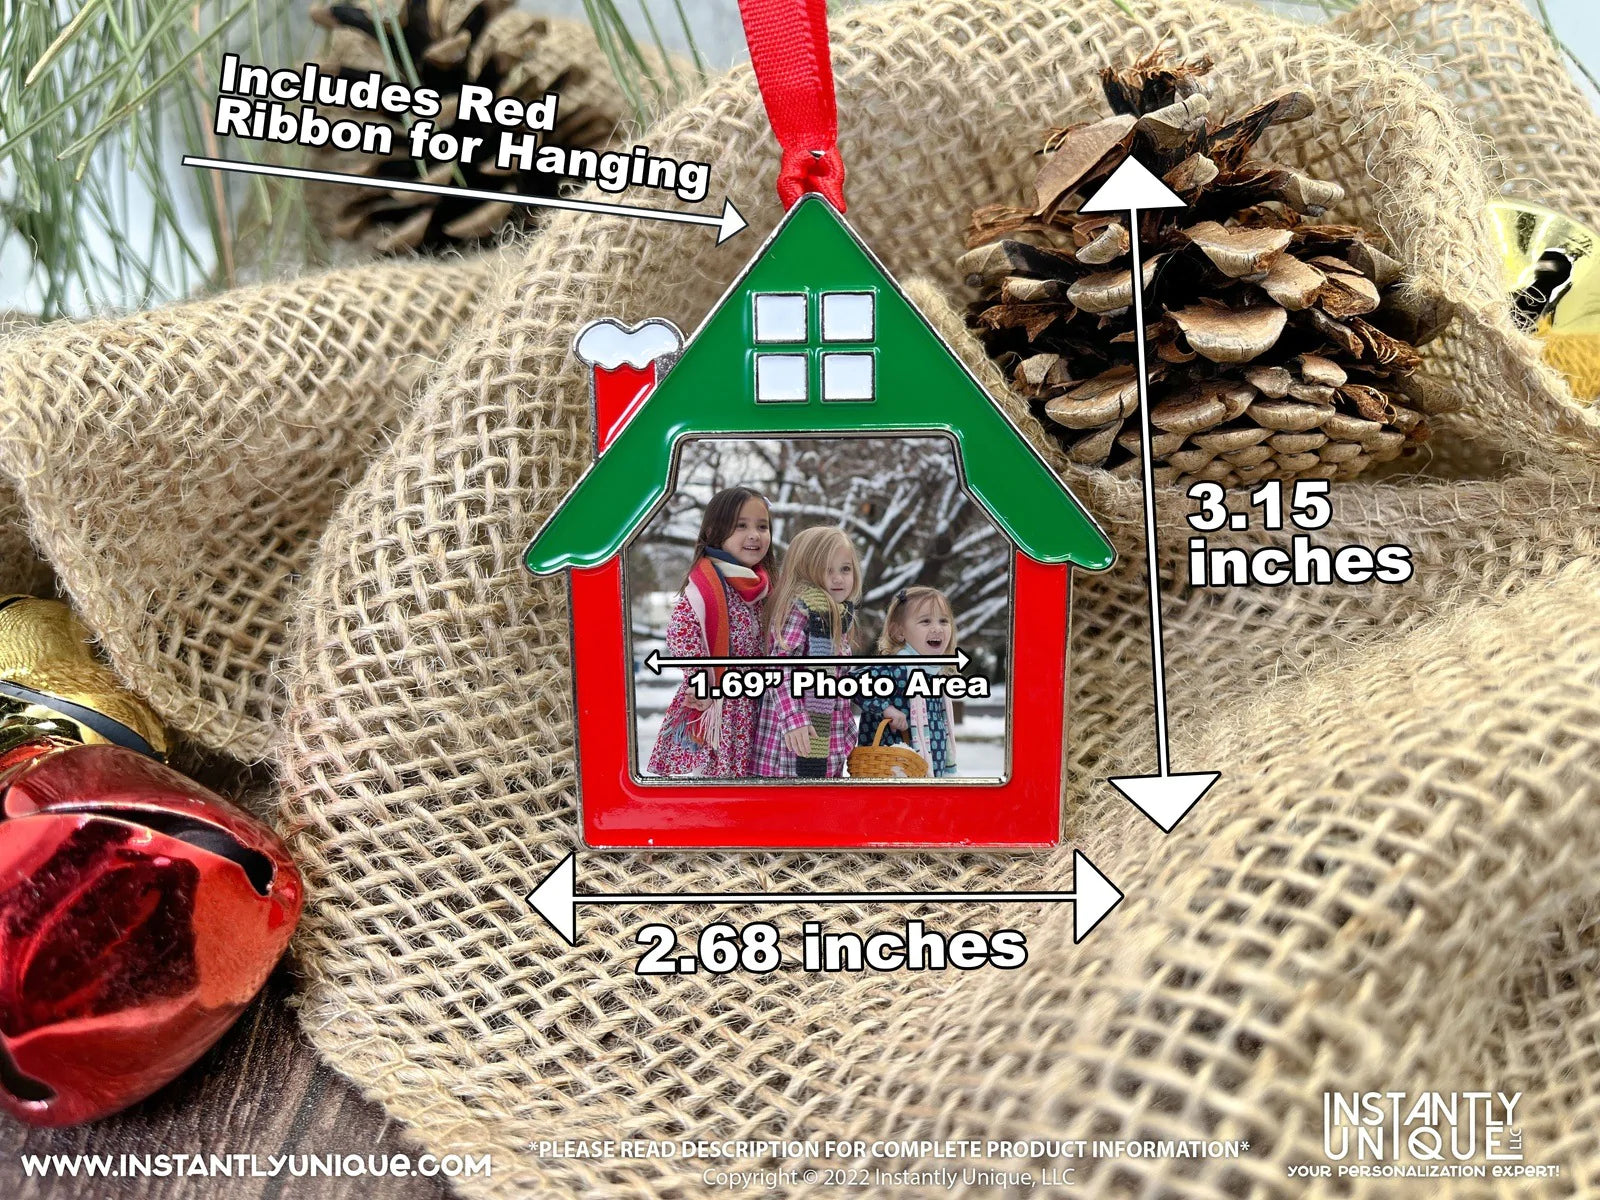 House Shaped Metal Ornament - Add Your Photo Christmas Ornament